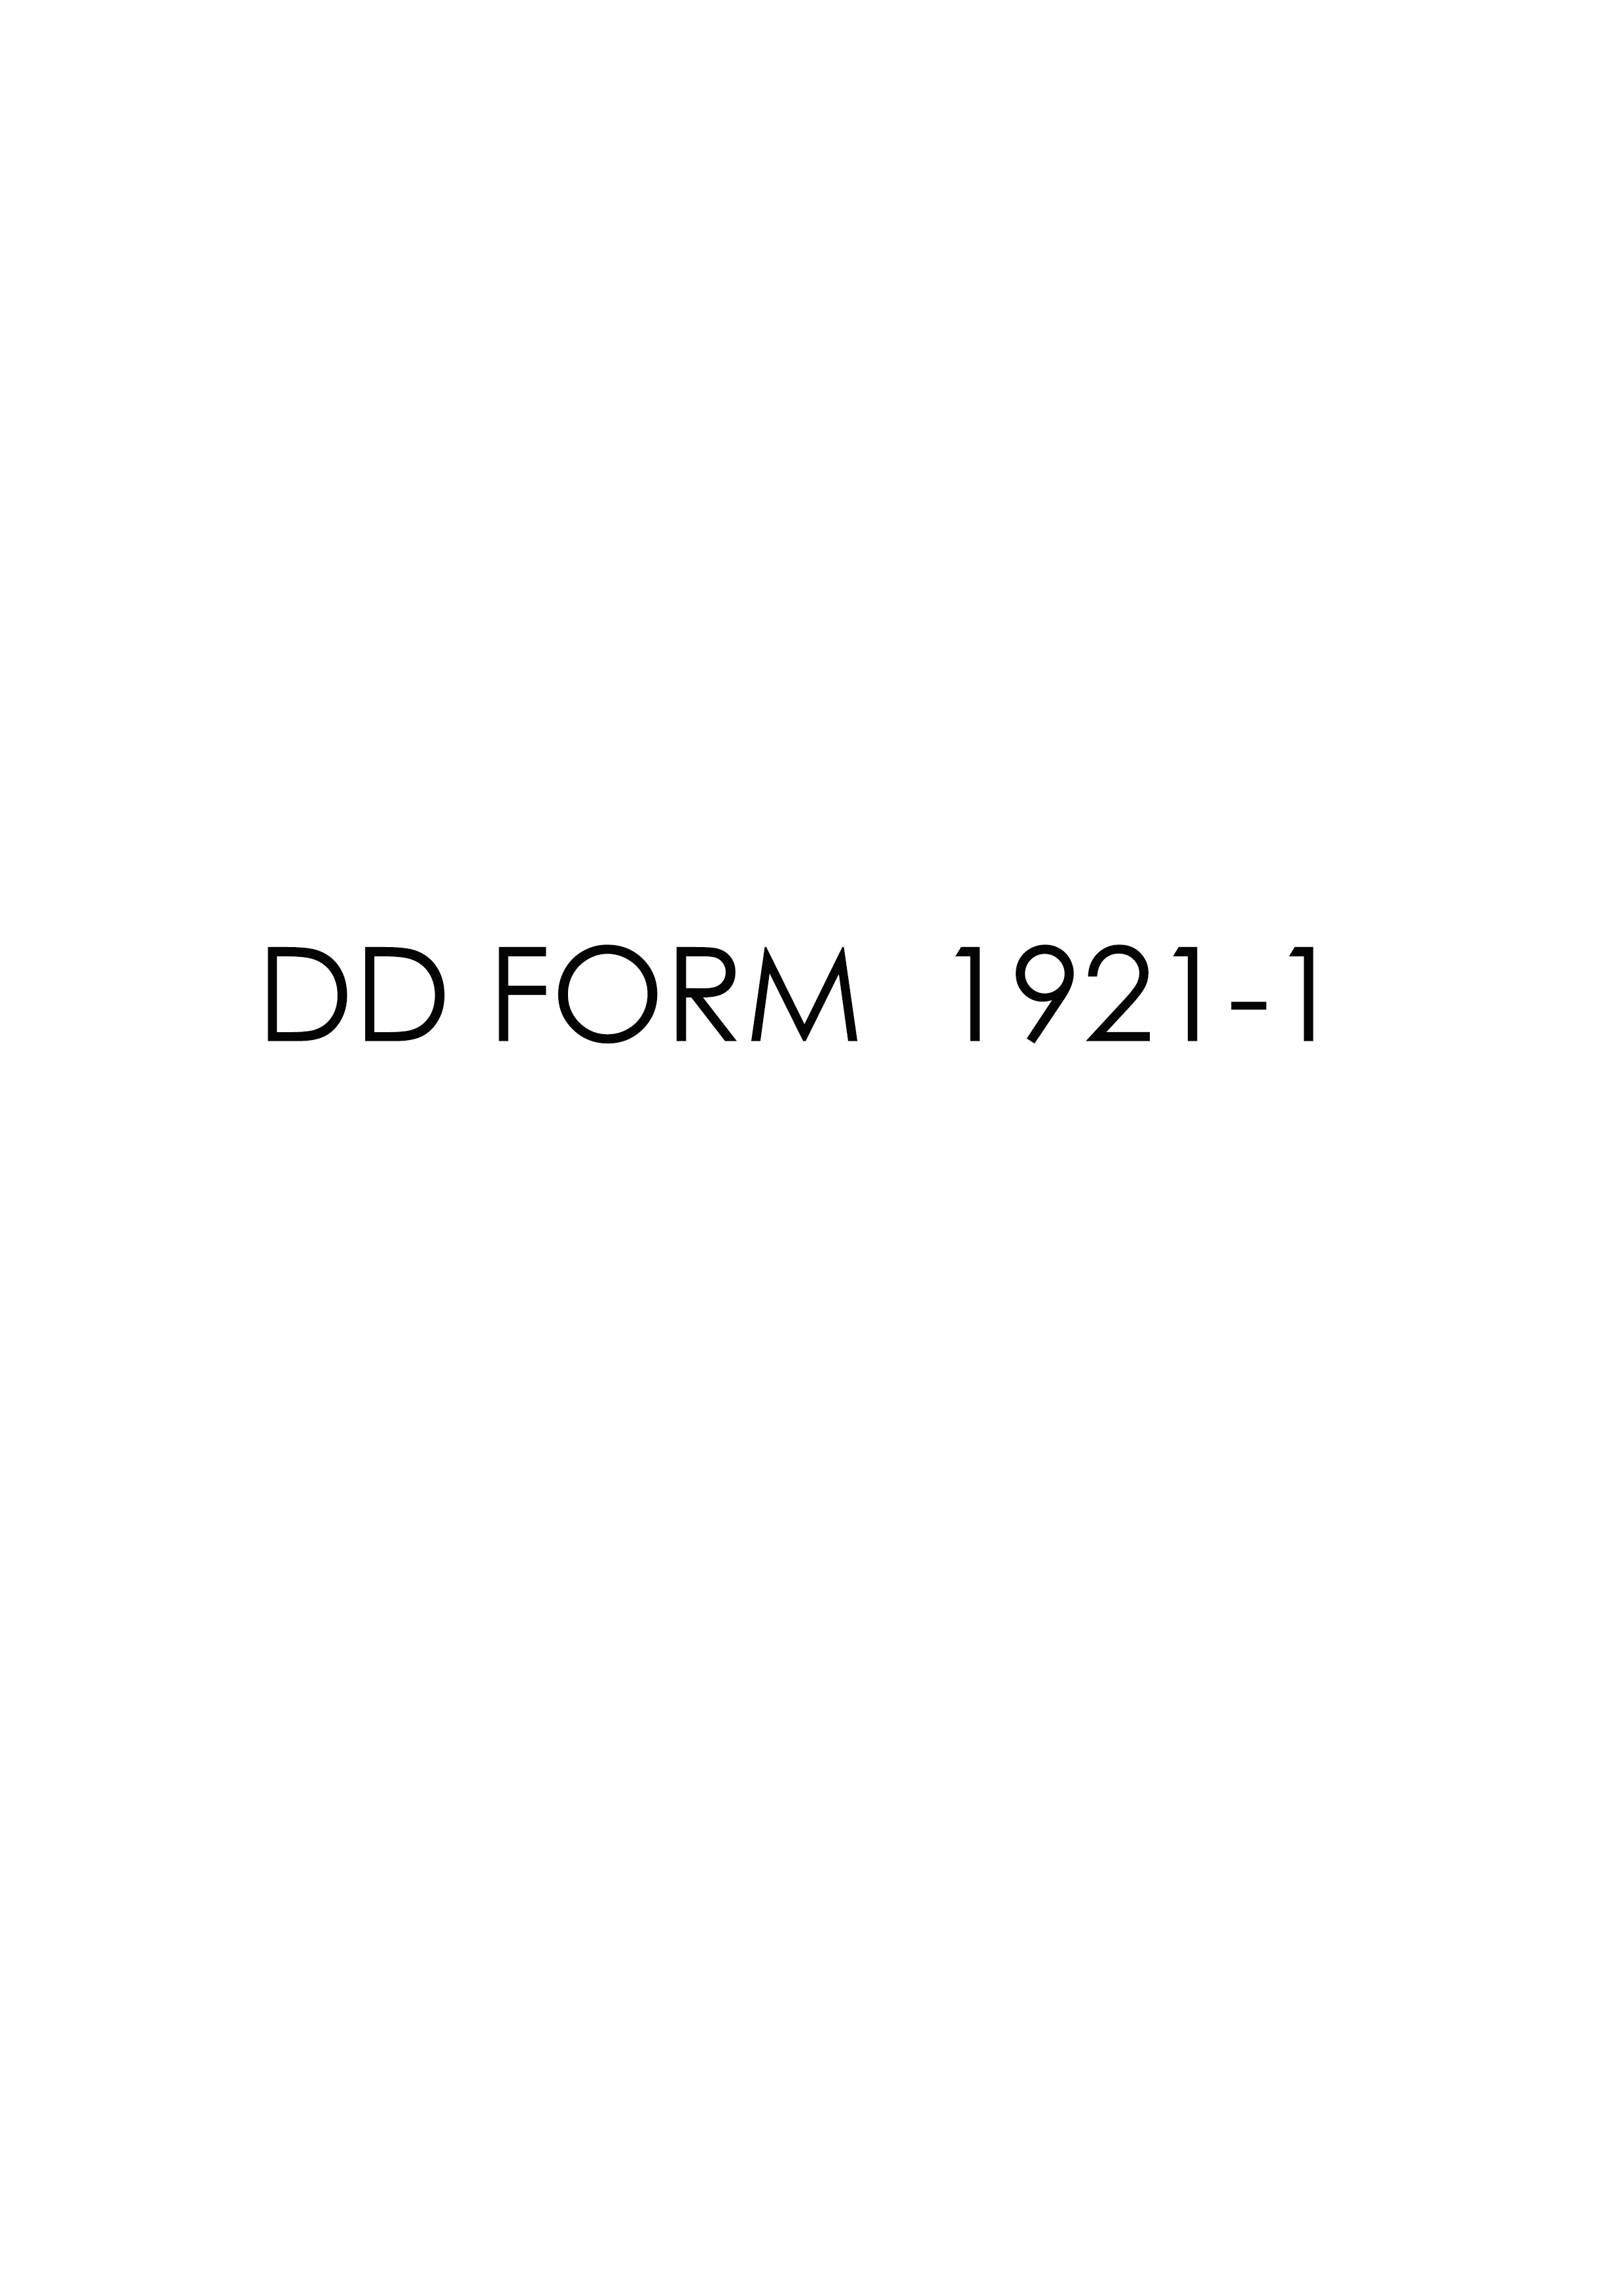 Download Fillable dd Form 1921-1